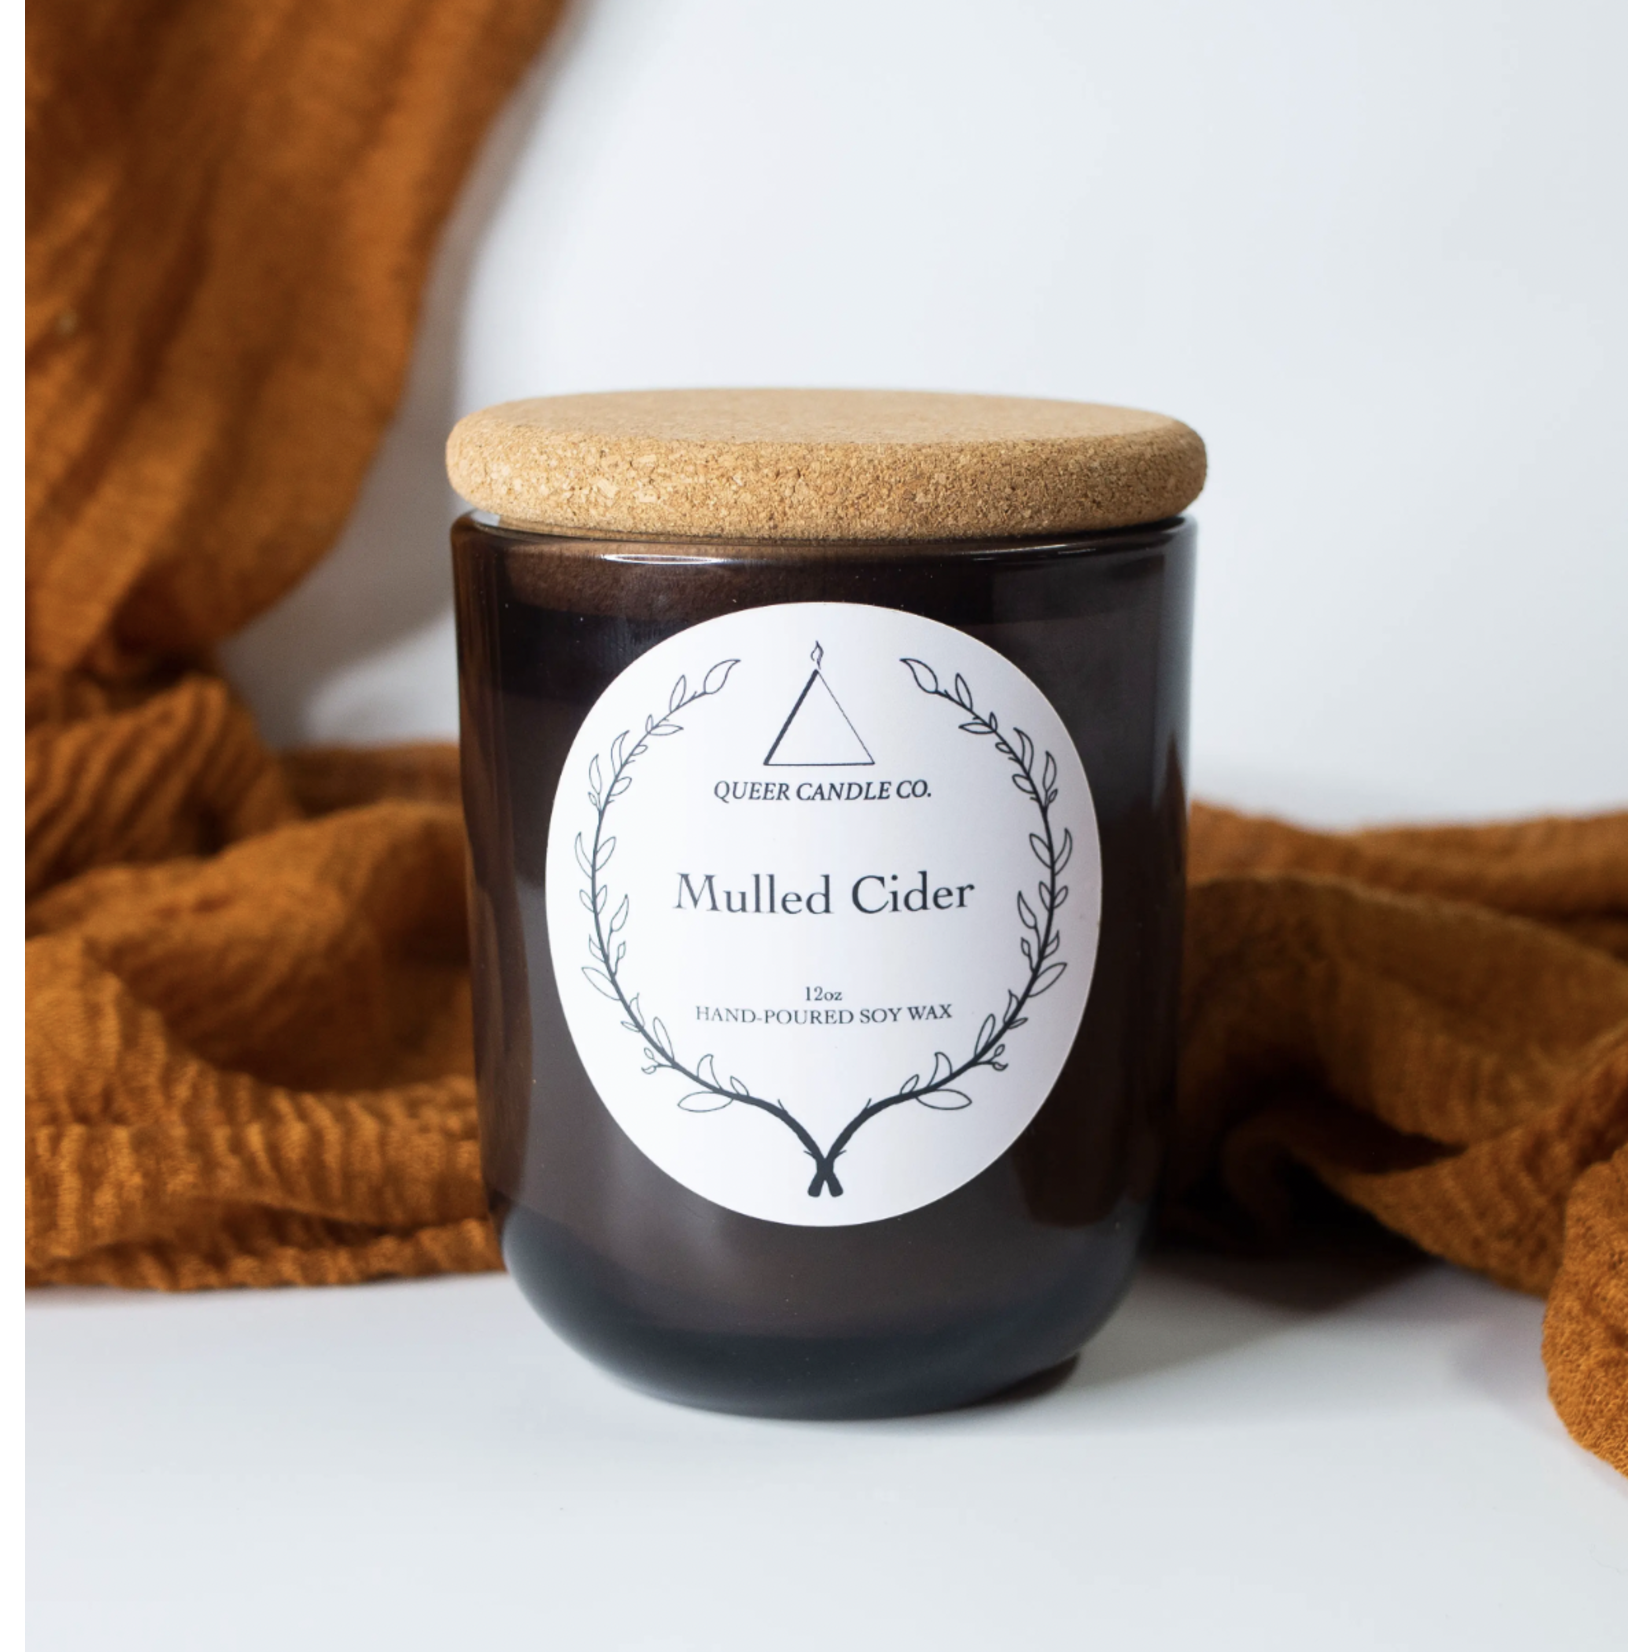 Queer Candle Co Mulled Cider: Fall Limited